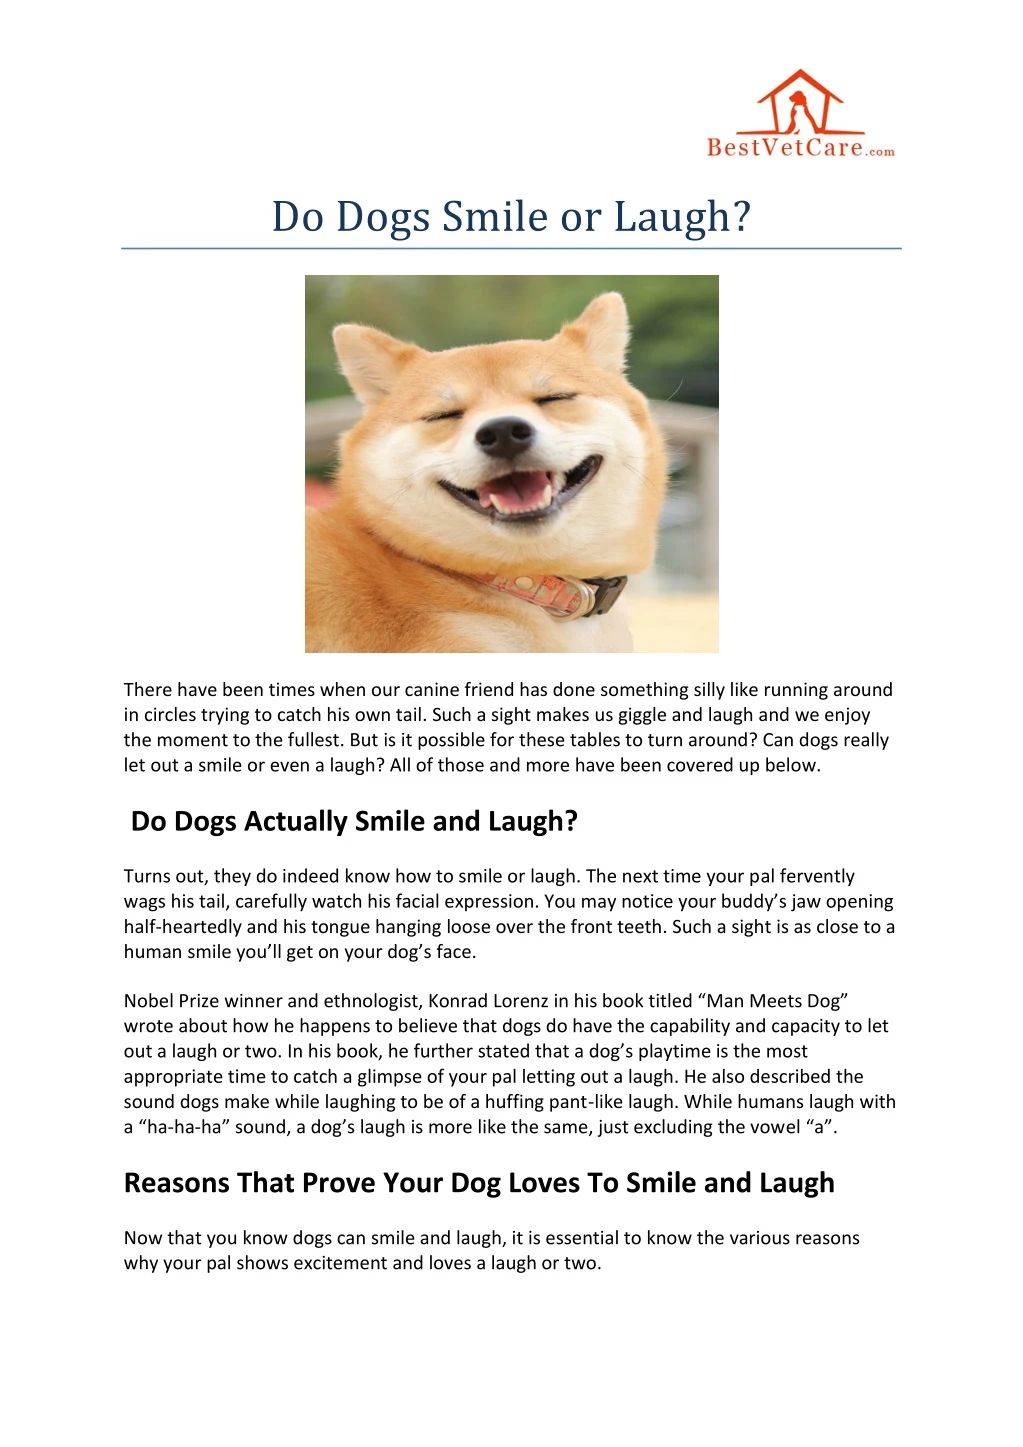 do dogs smile or laugh